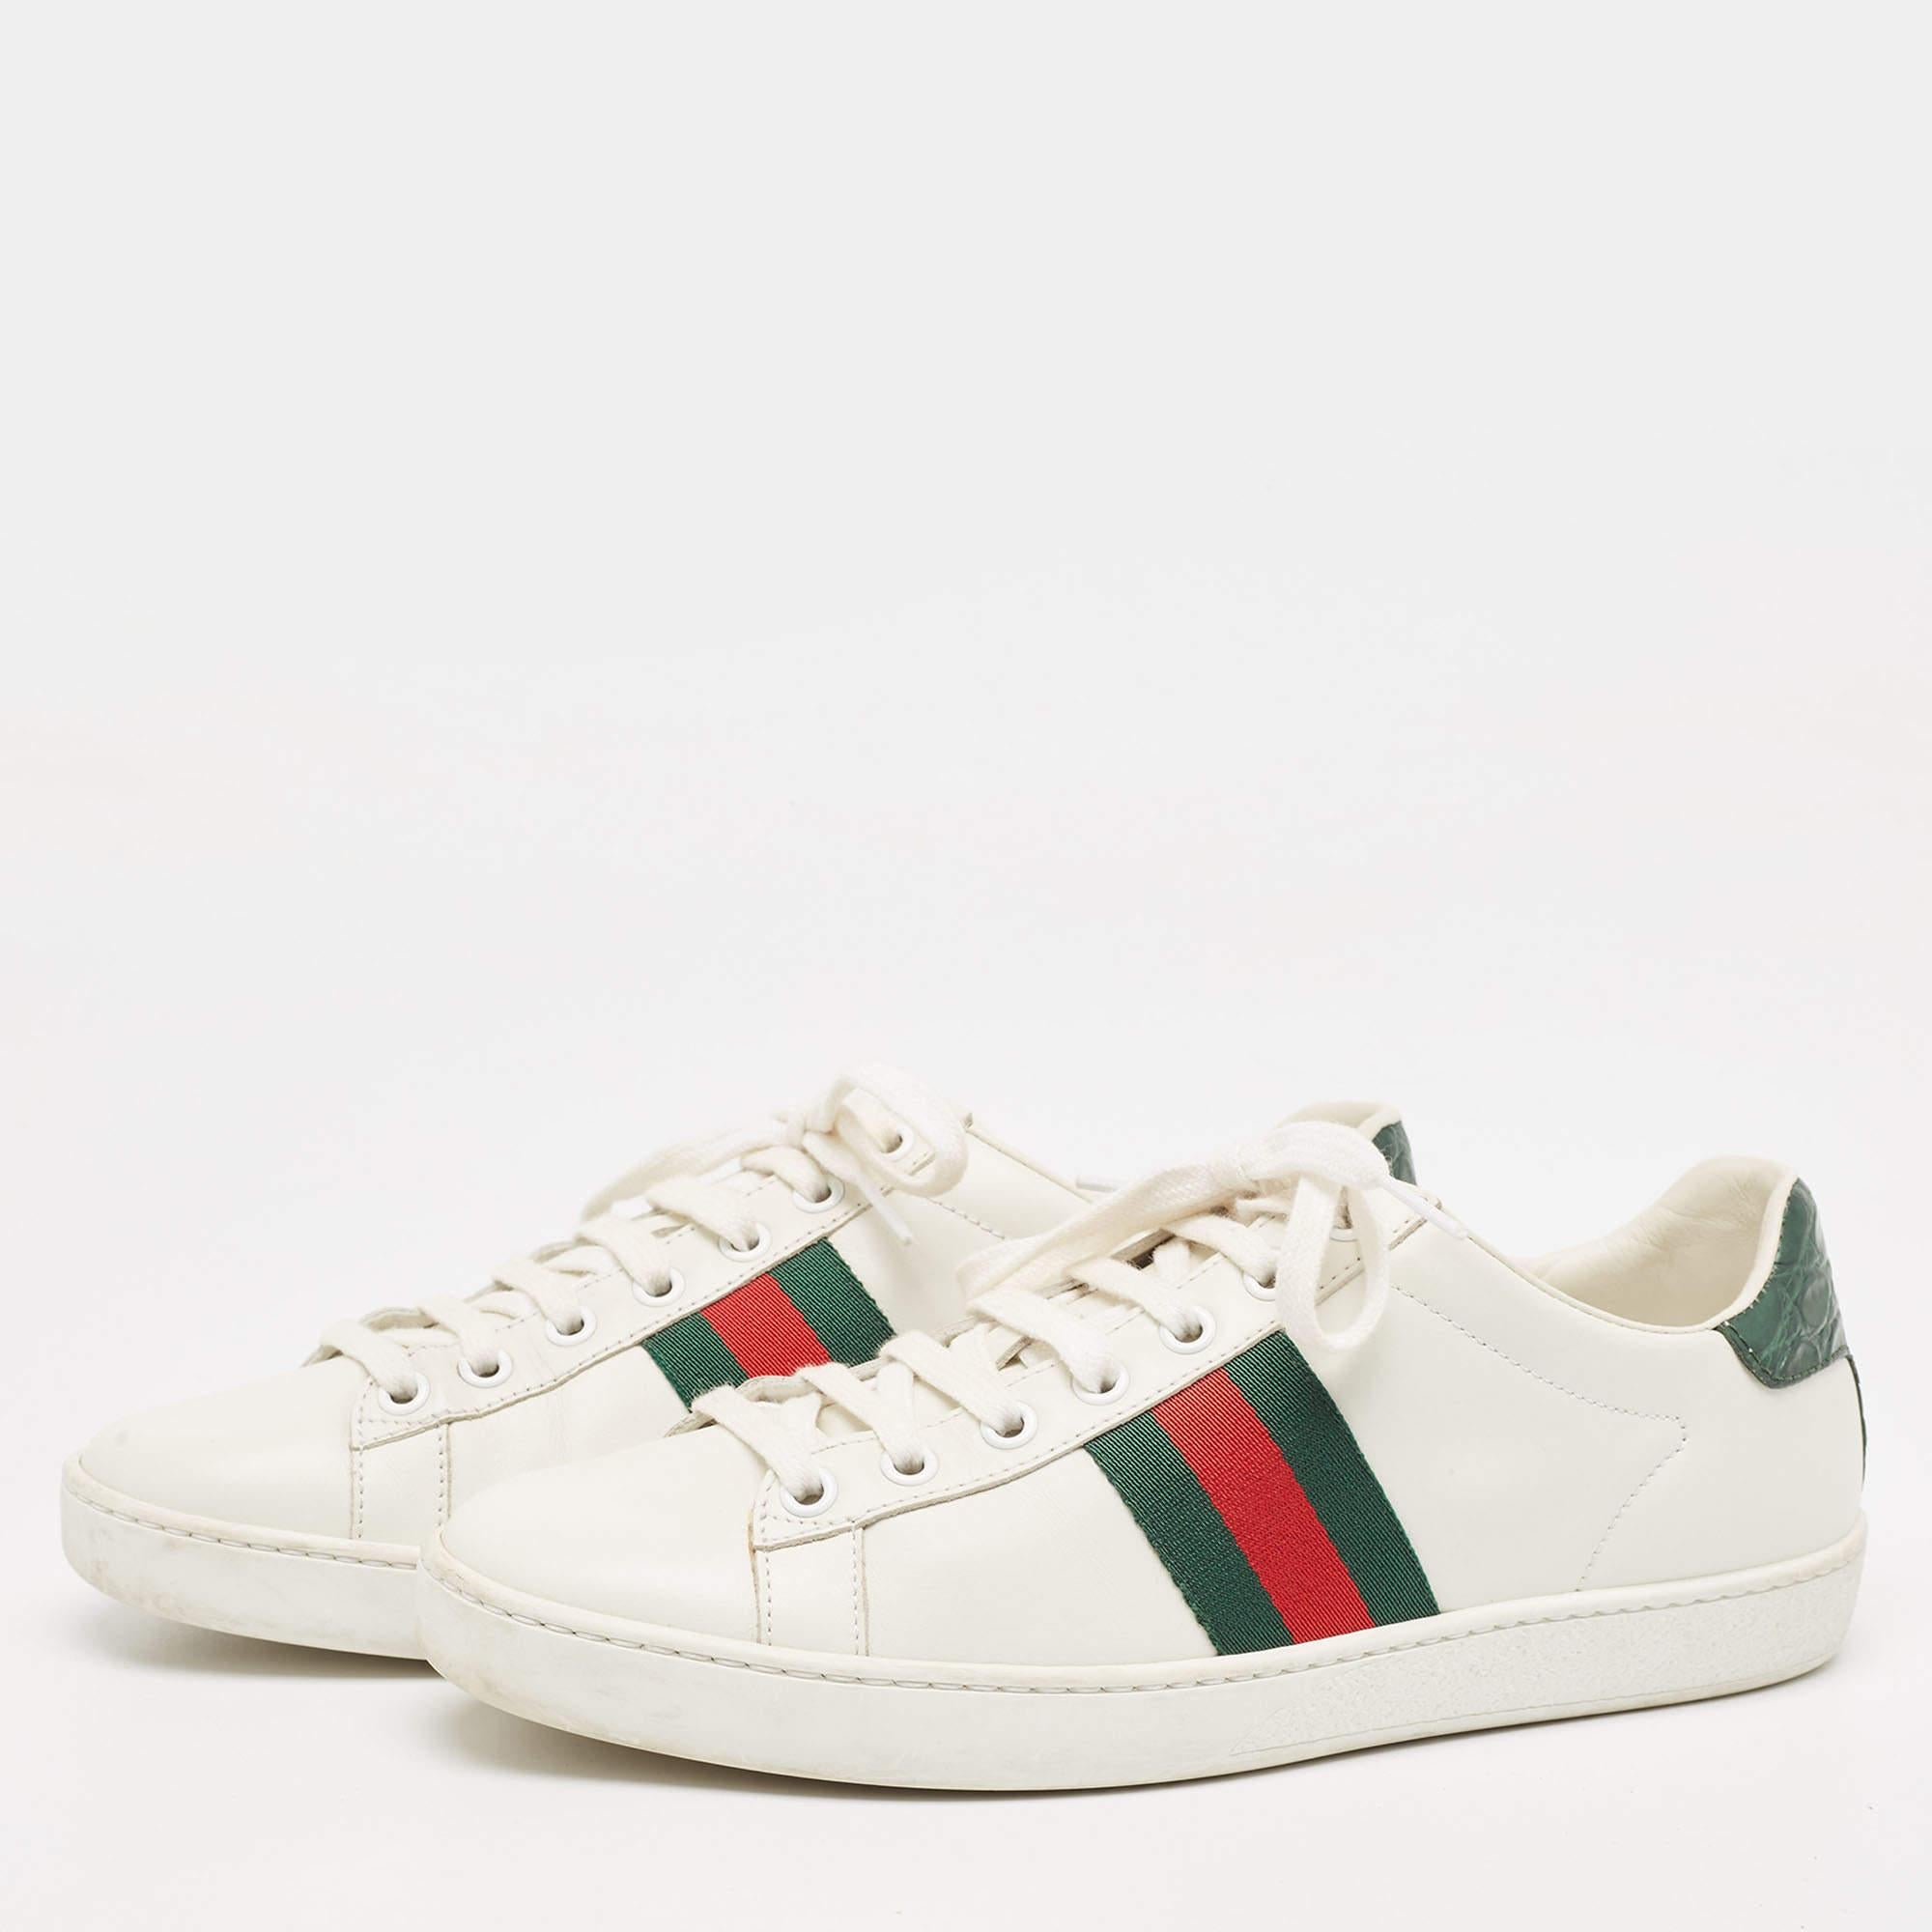 Gucci White/Green Cro Embossed and Leather Ace Sneakers Size 38 For Sale 3